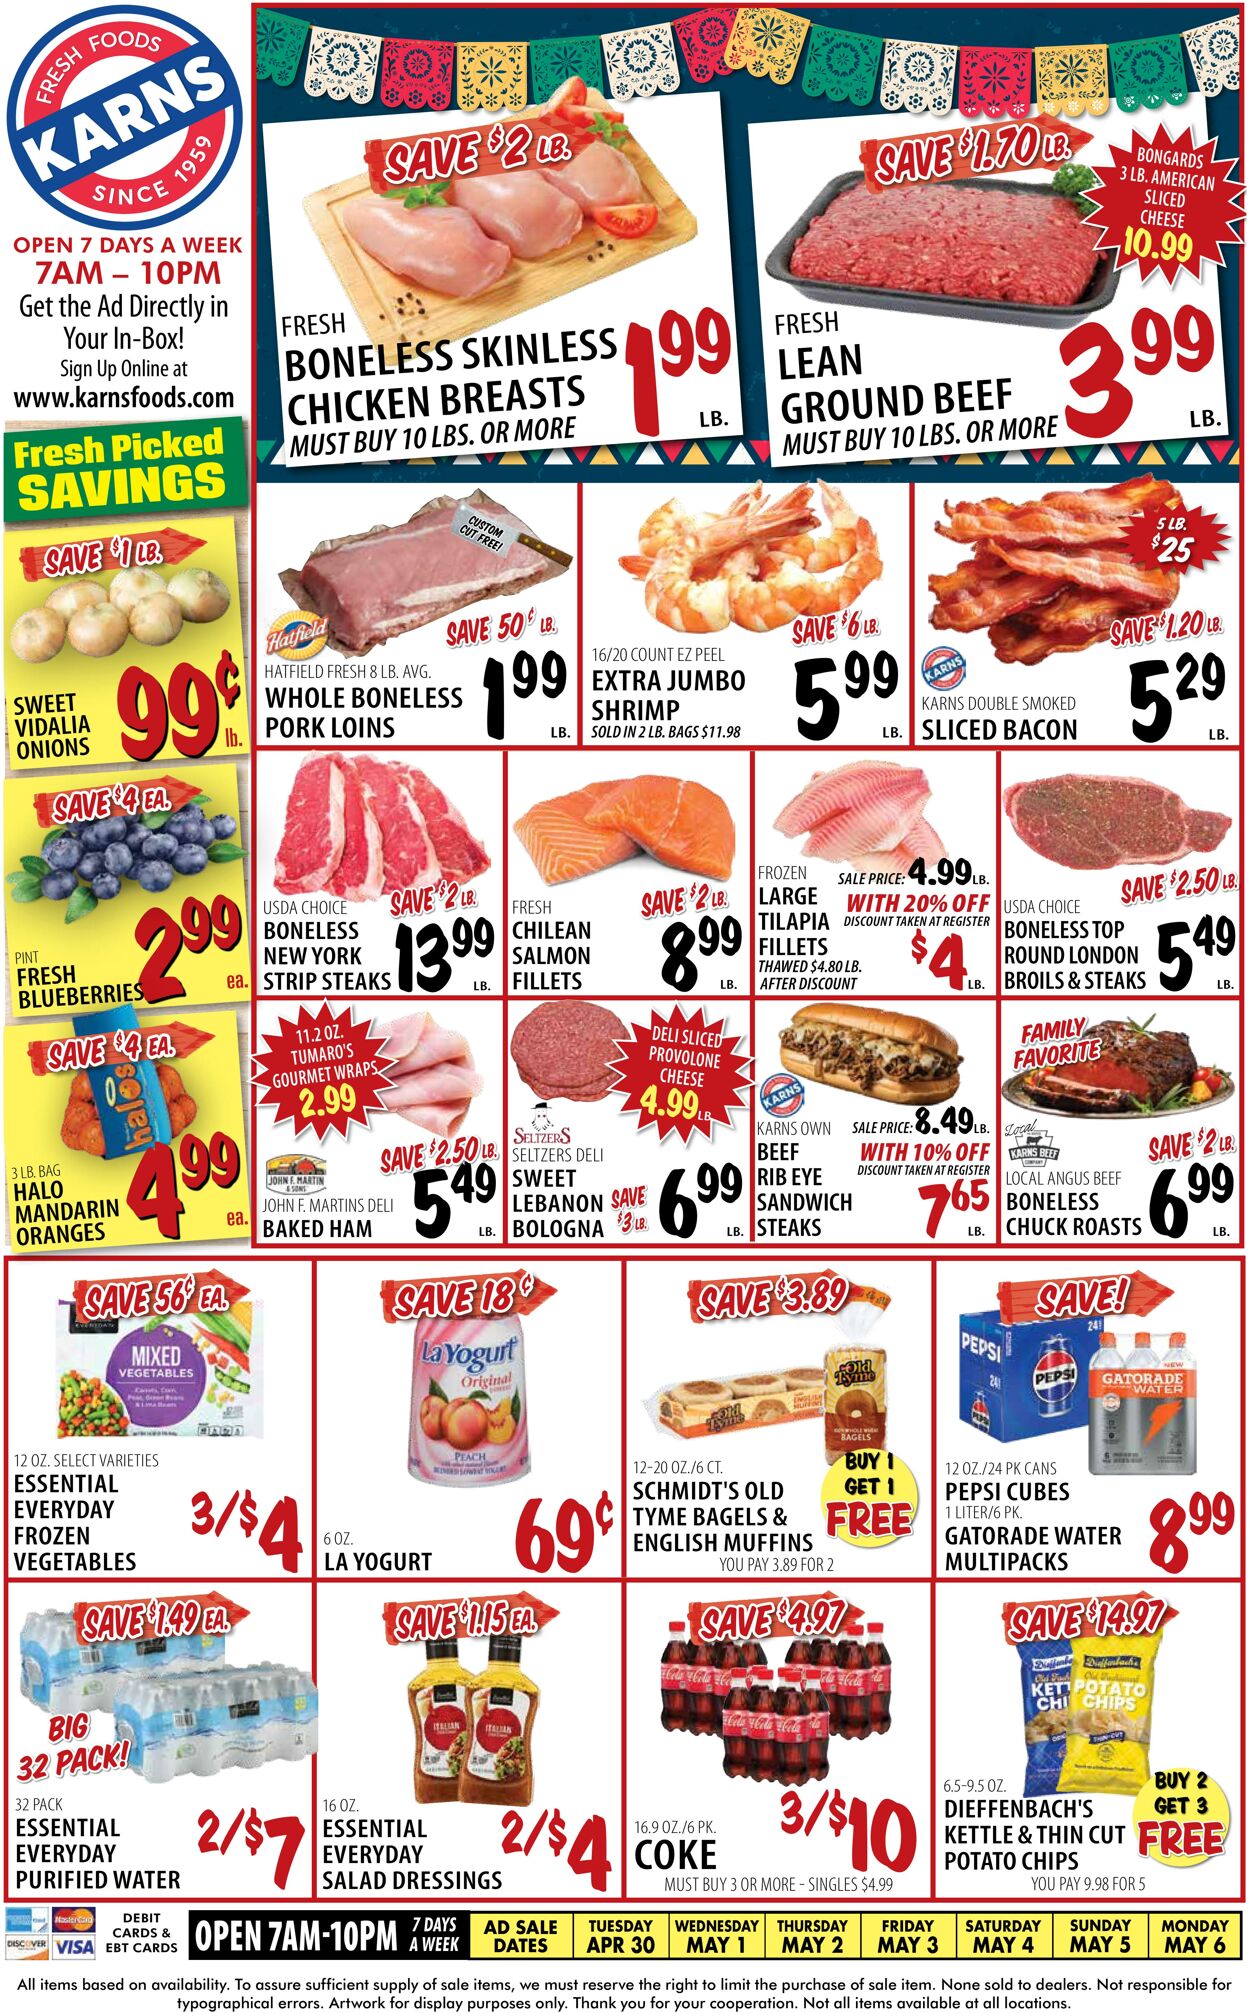 Karns Quality Foods Promotional weekly ads